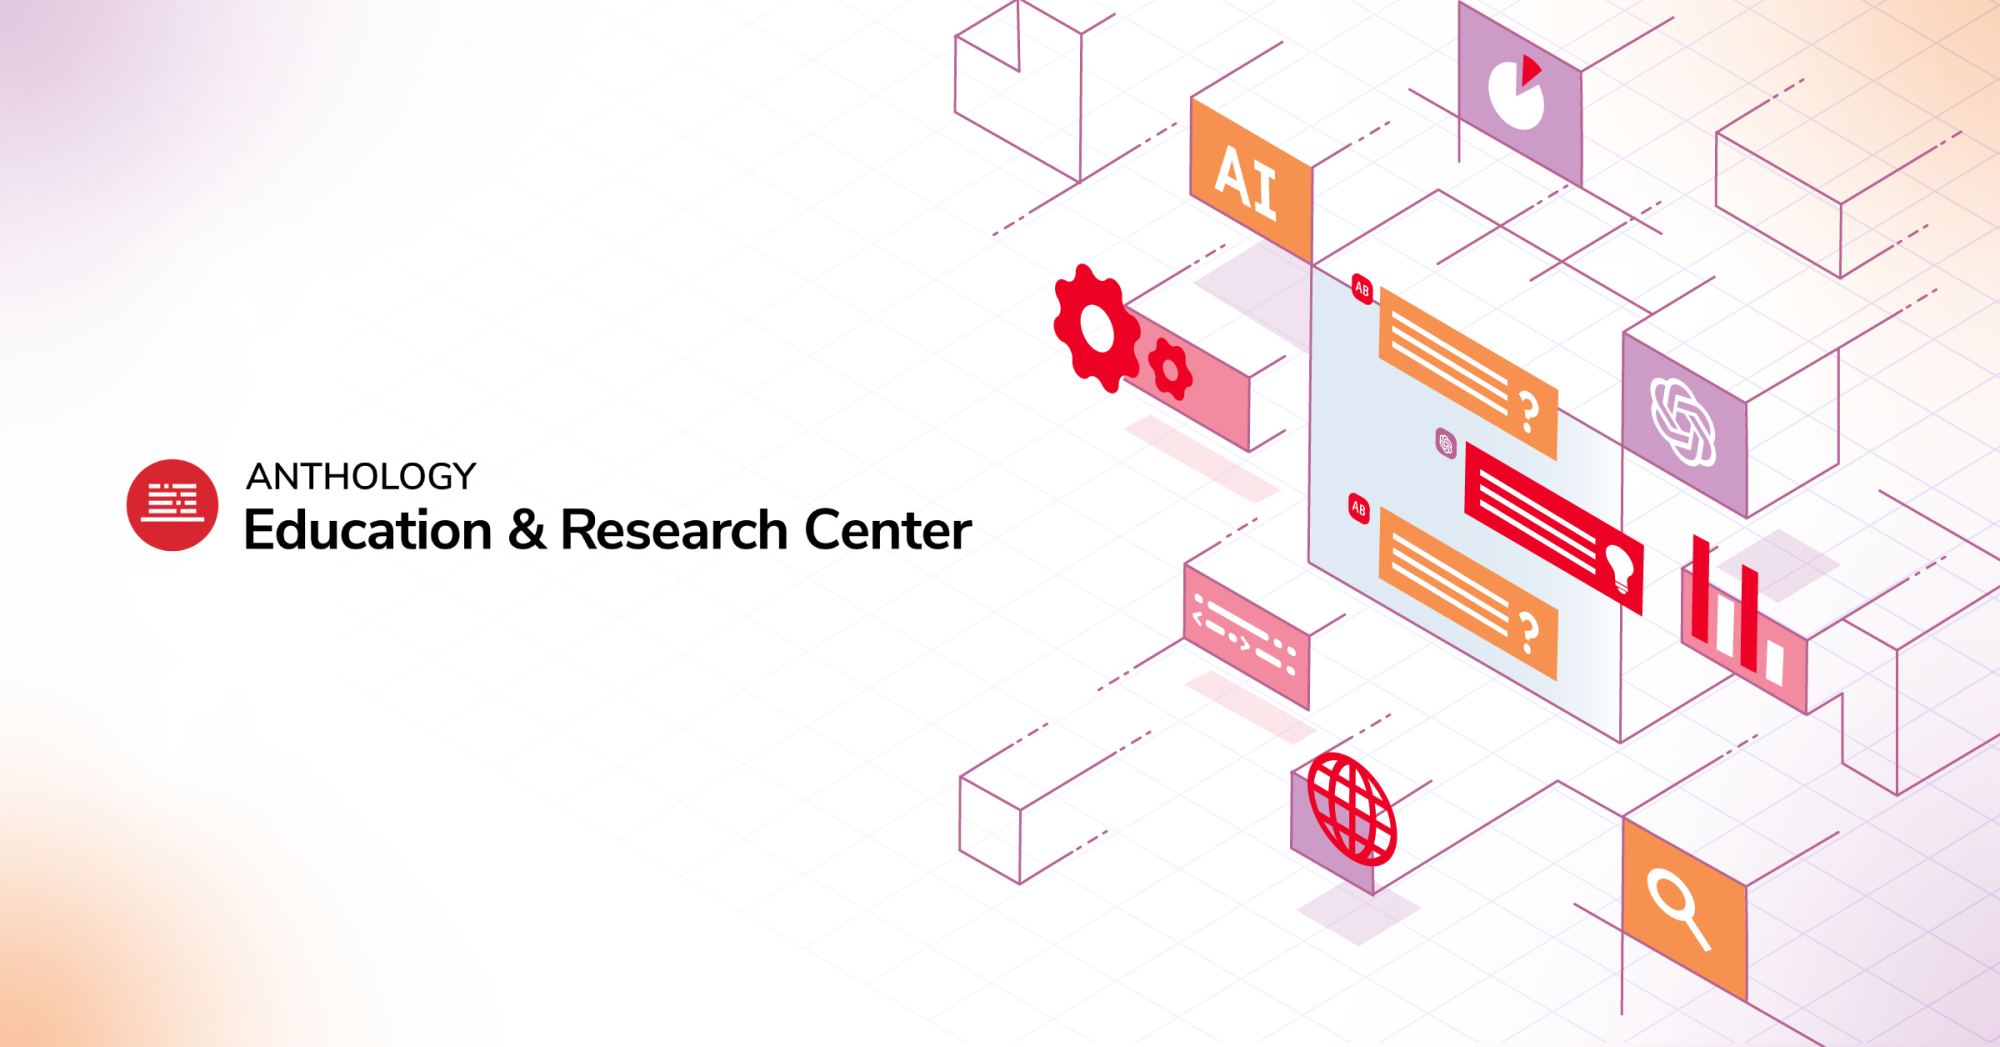 The Anthology Education & Research Center logo next to an illustration representing AI innovation